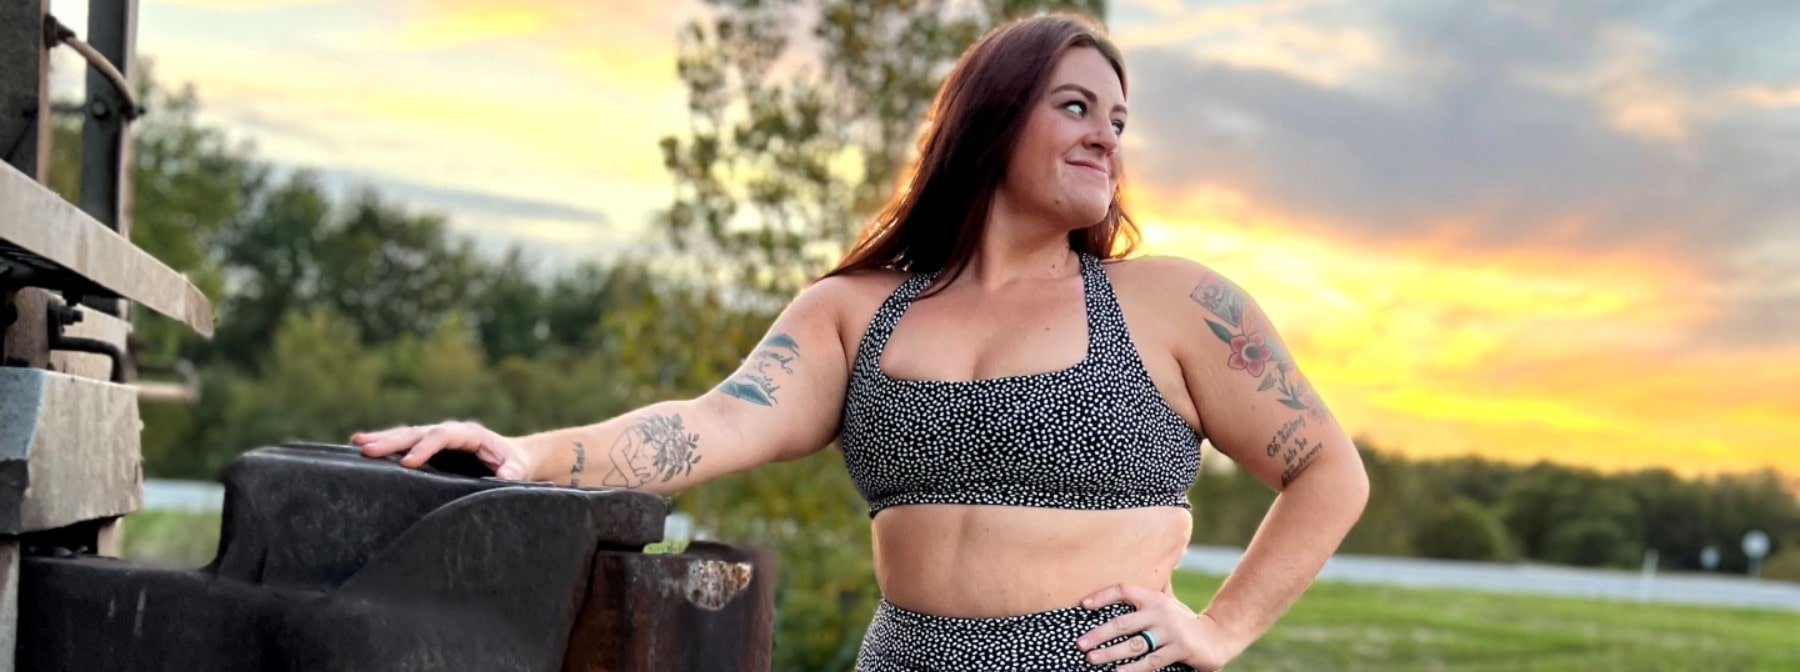 “I Didn’t Need To Change My Body To Be Worthy Of It” | Exercising Self-Love With Jensofit